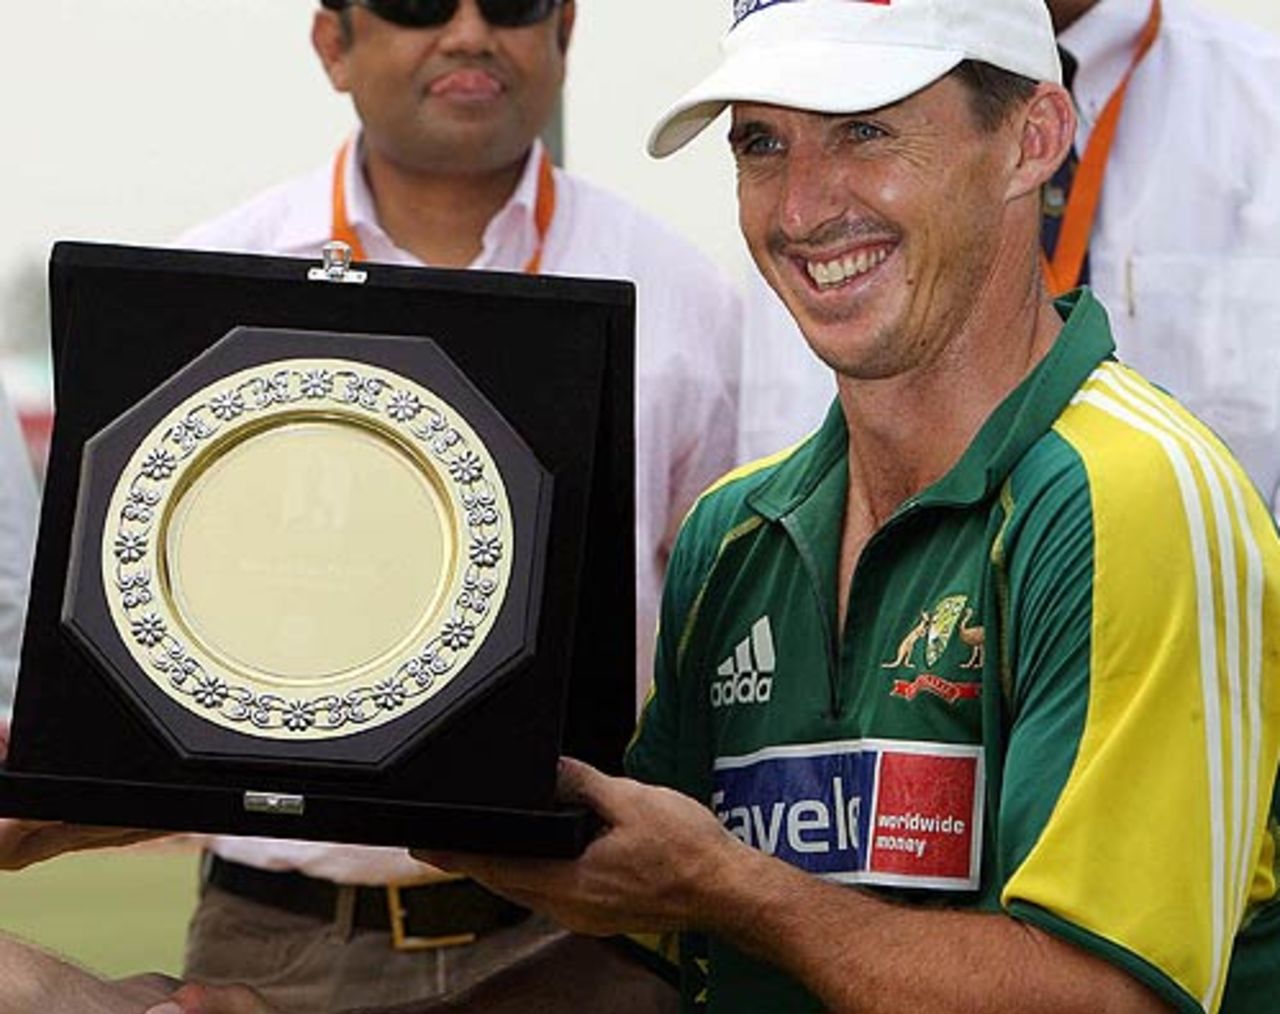 Brad Hogg in a cheerful mood after being named the Man of the Series, Bangladesh v Australia, 3rd ODI, Fatullah, April 28, 2006